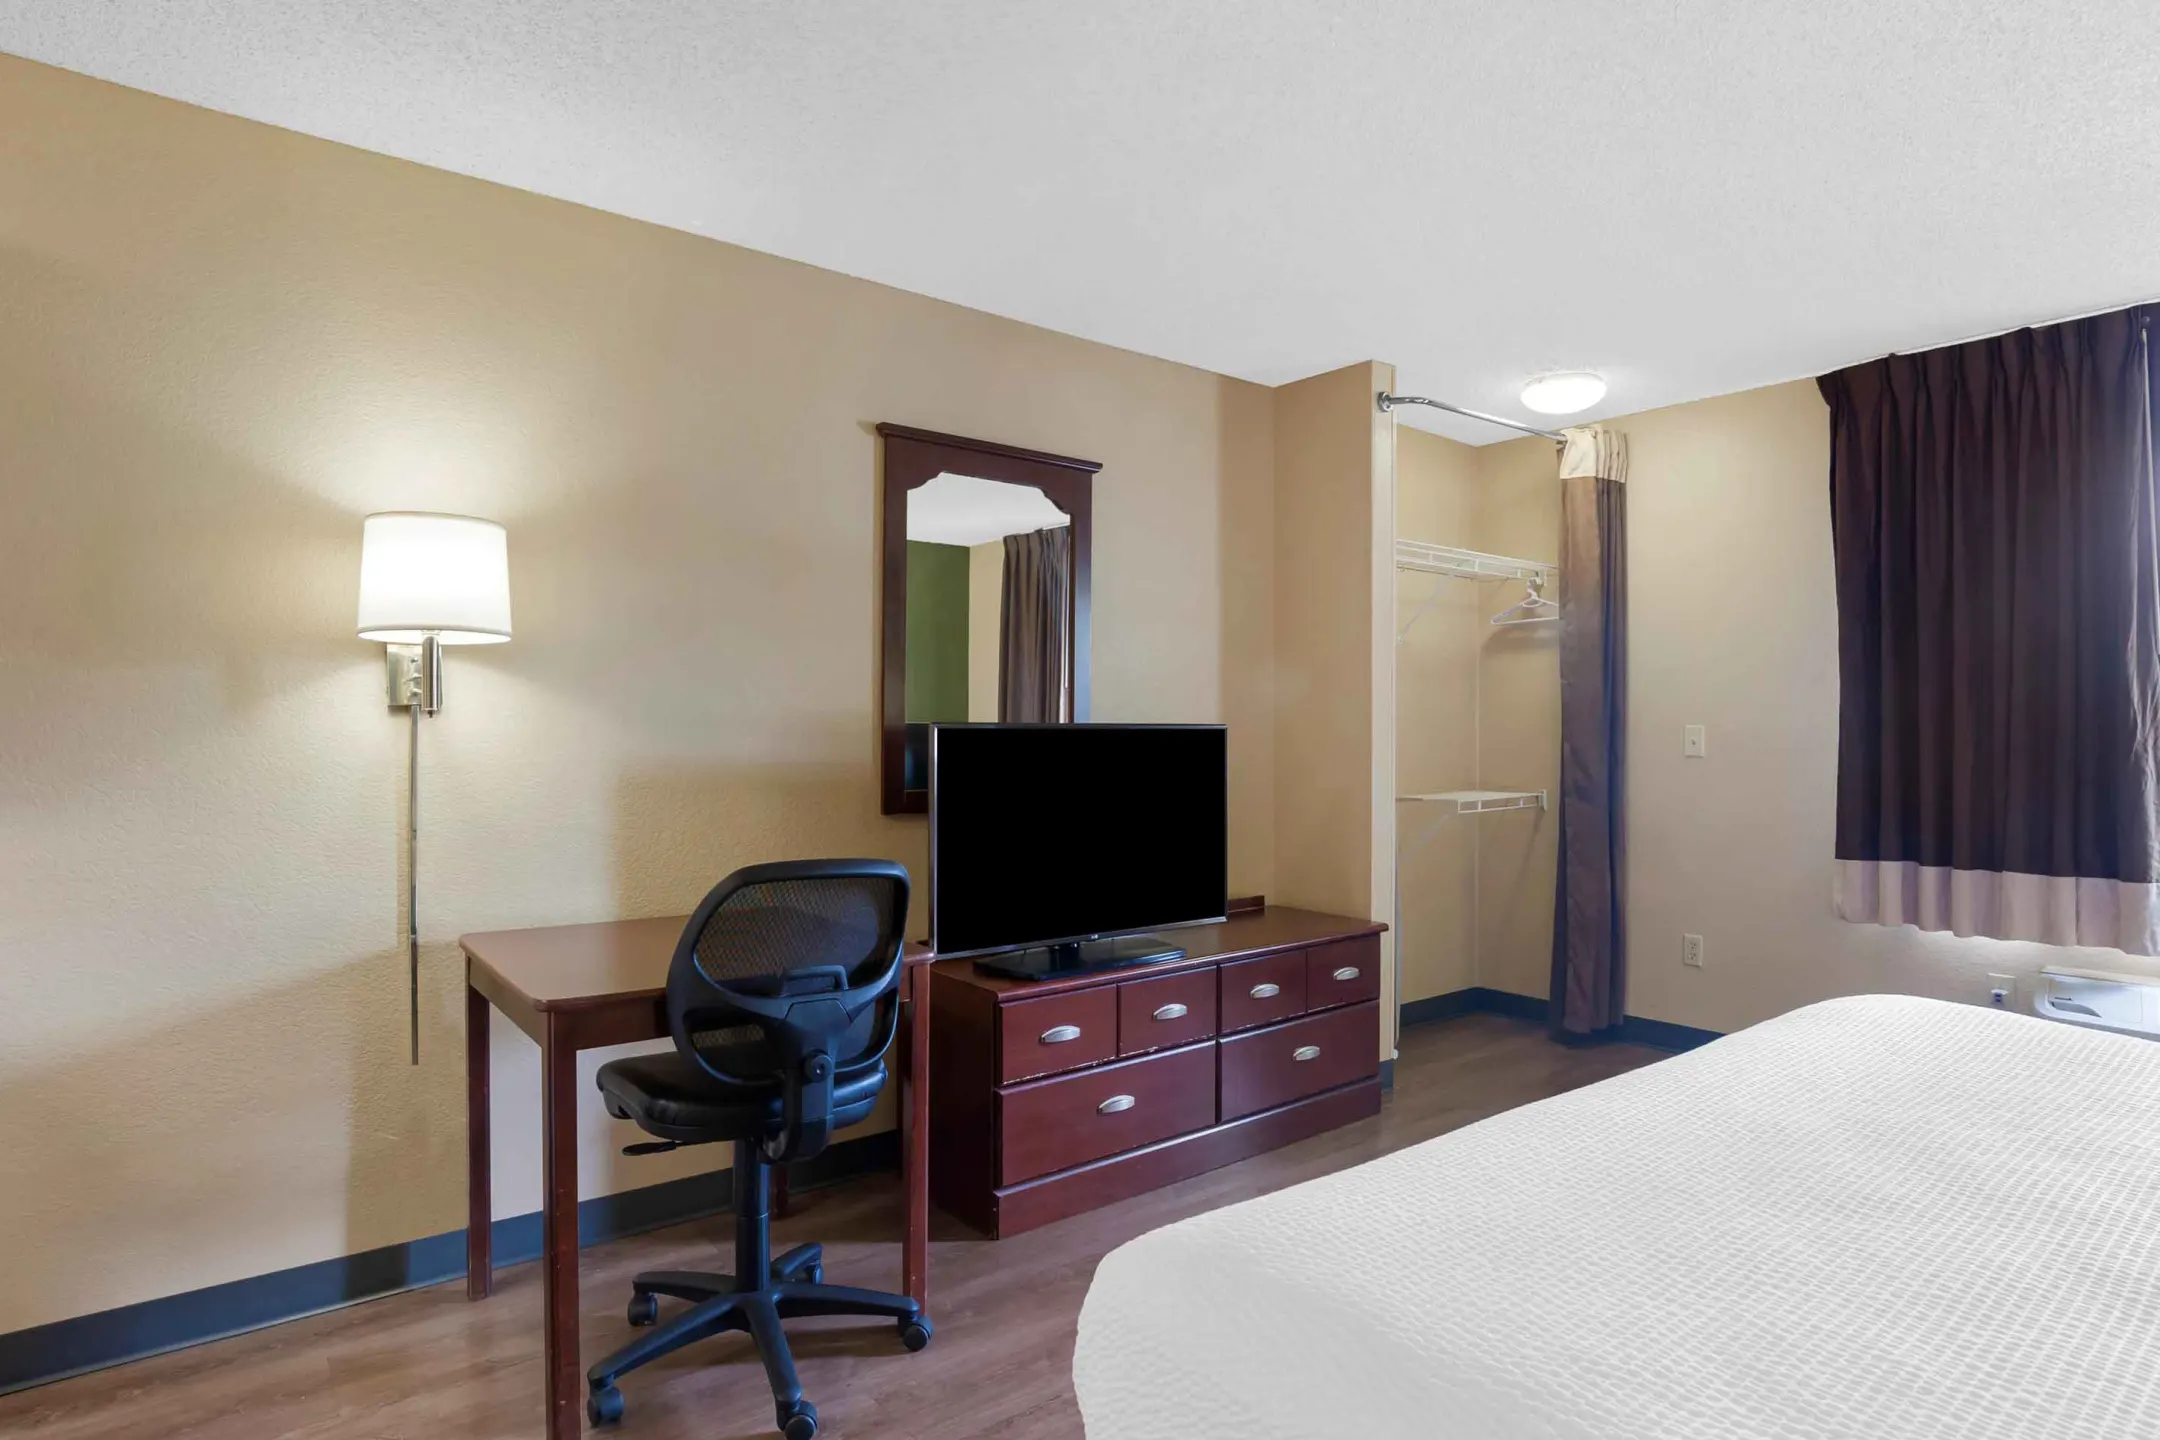 Bedroom - Furnished Studio - Seattle - Bothell - West - Bothell, WA